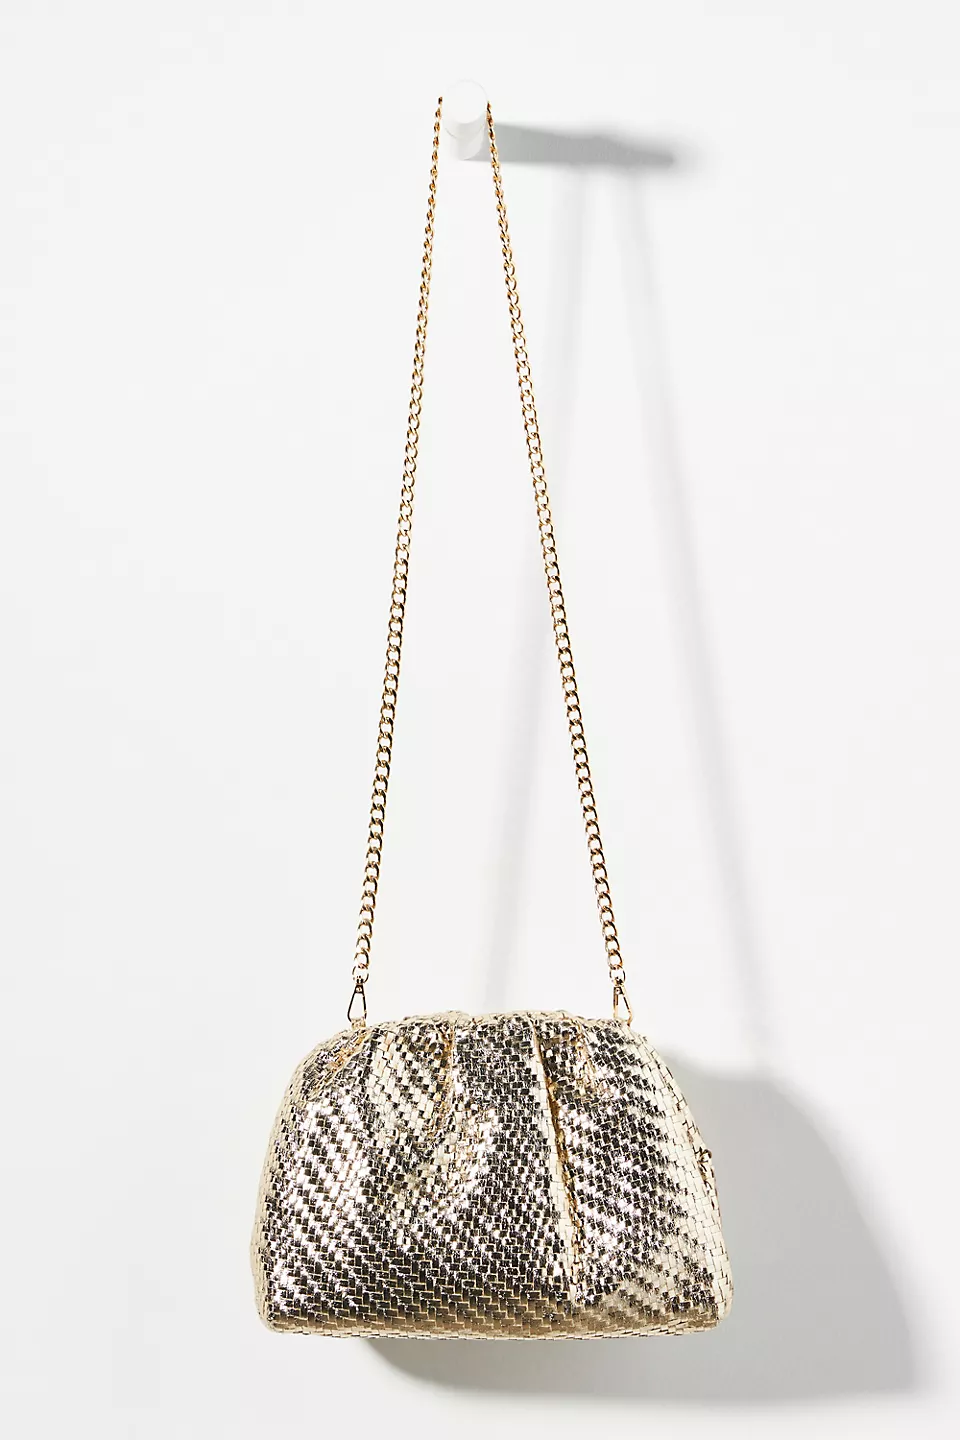 Gold, long-chain Frankie clutch on a white background